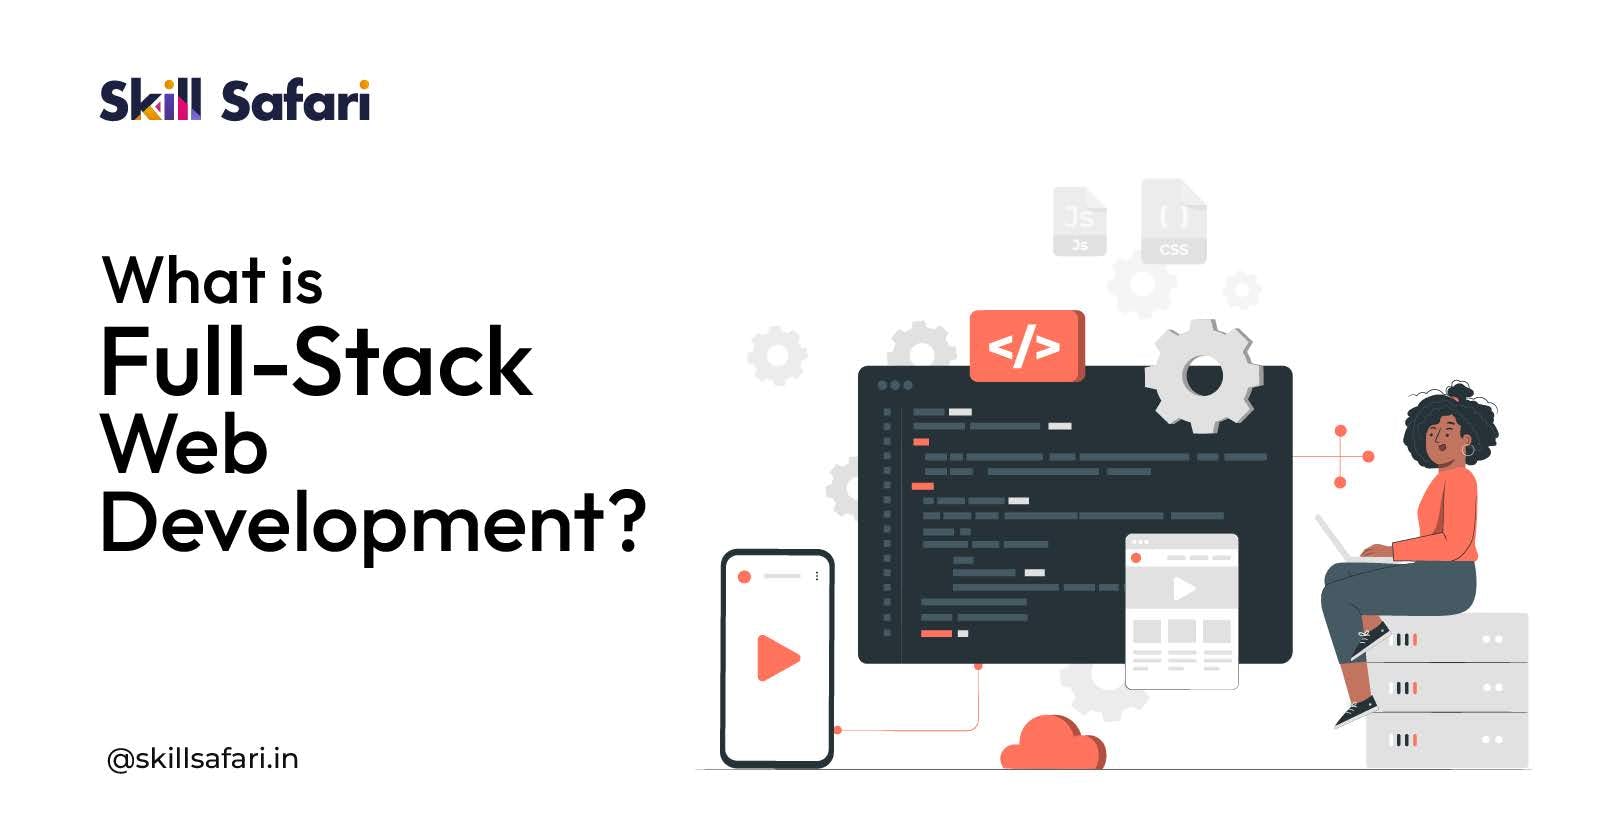 What is Full-Stack Web Development?